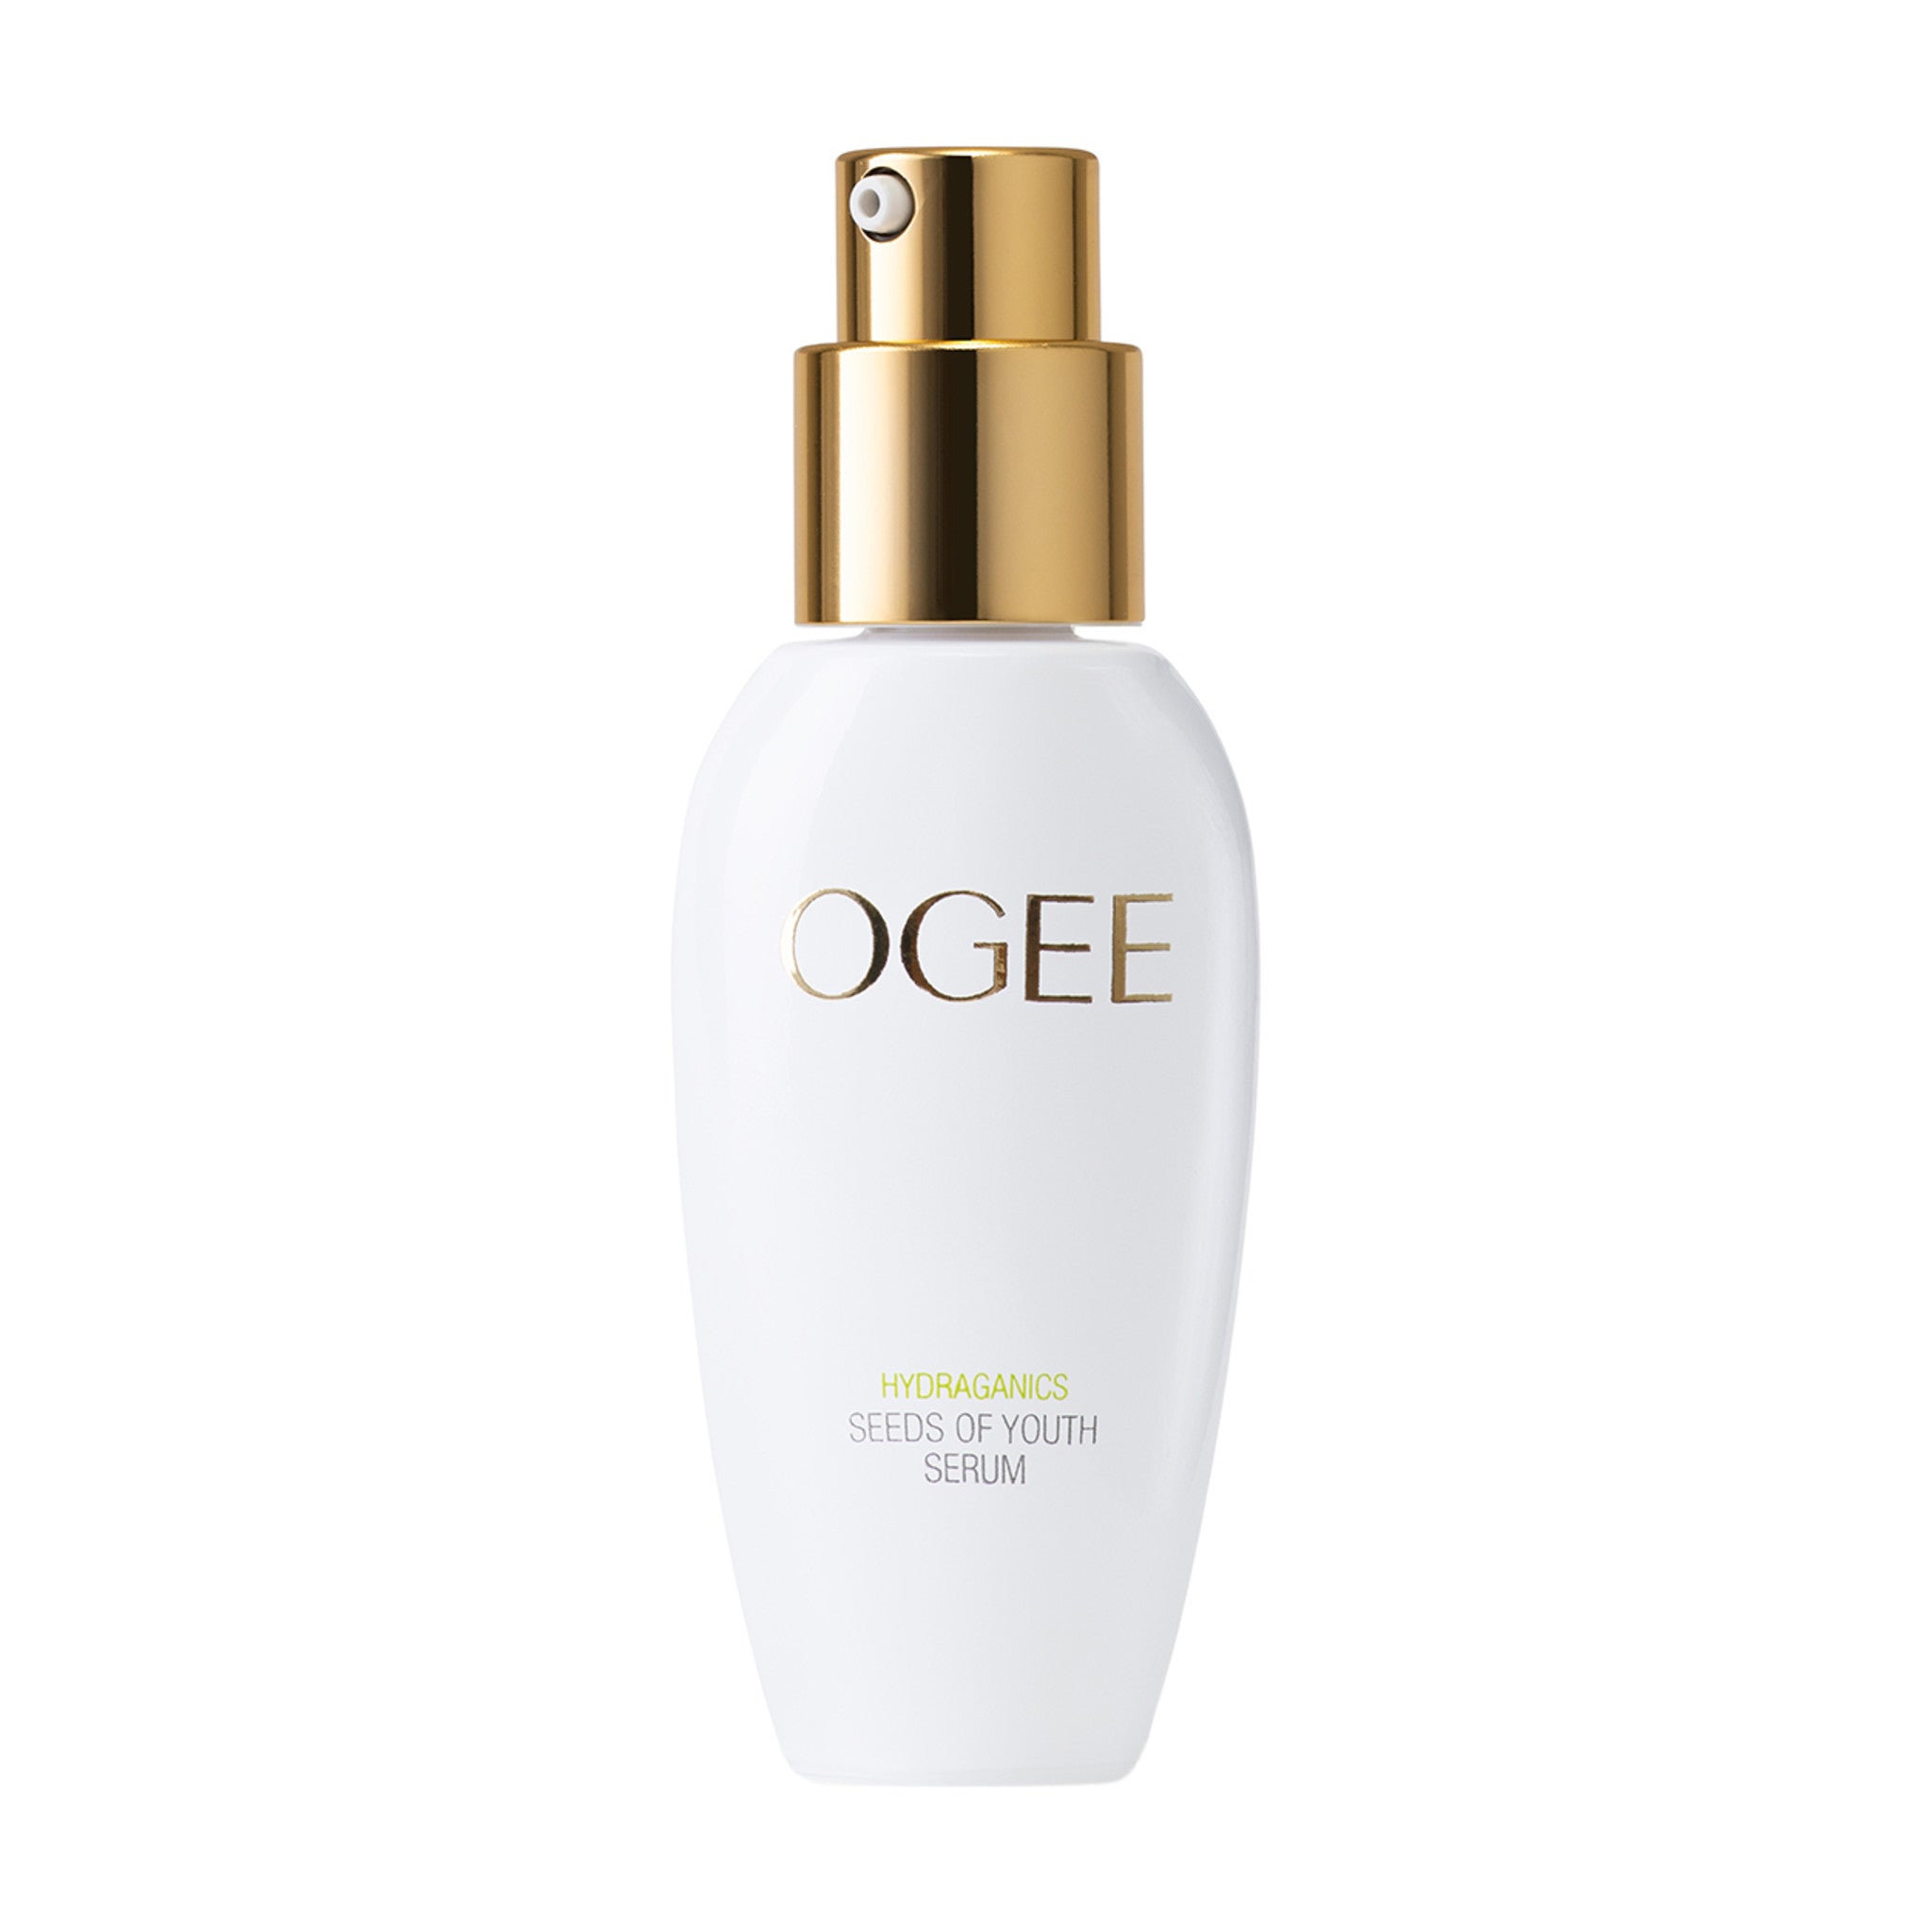 Ogee Seeds of Youth Serum main image.